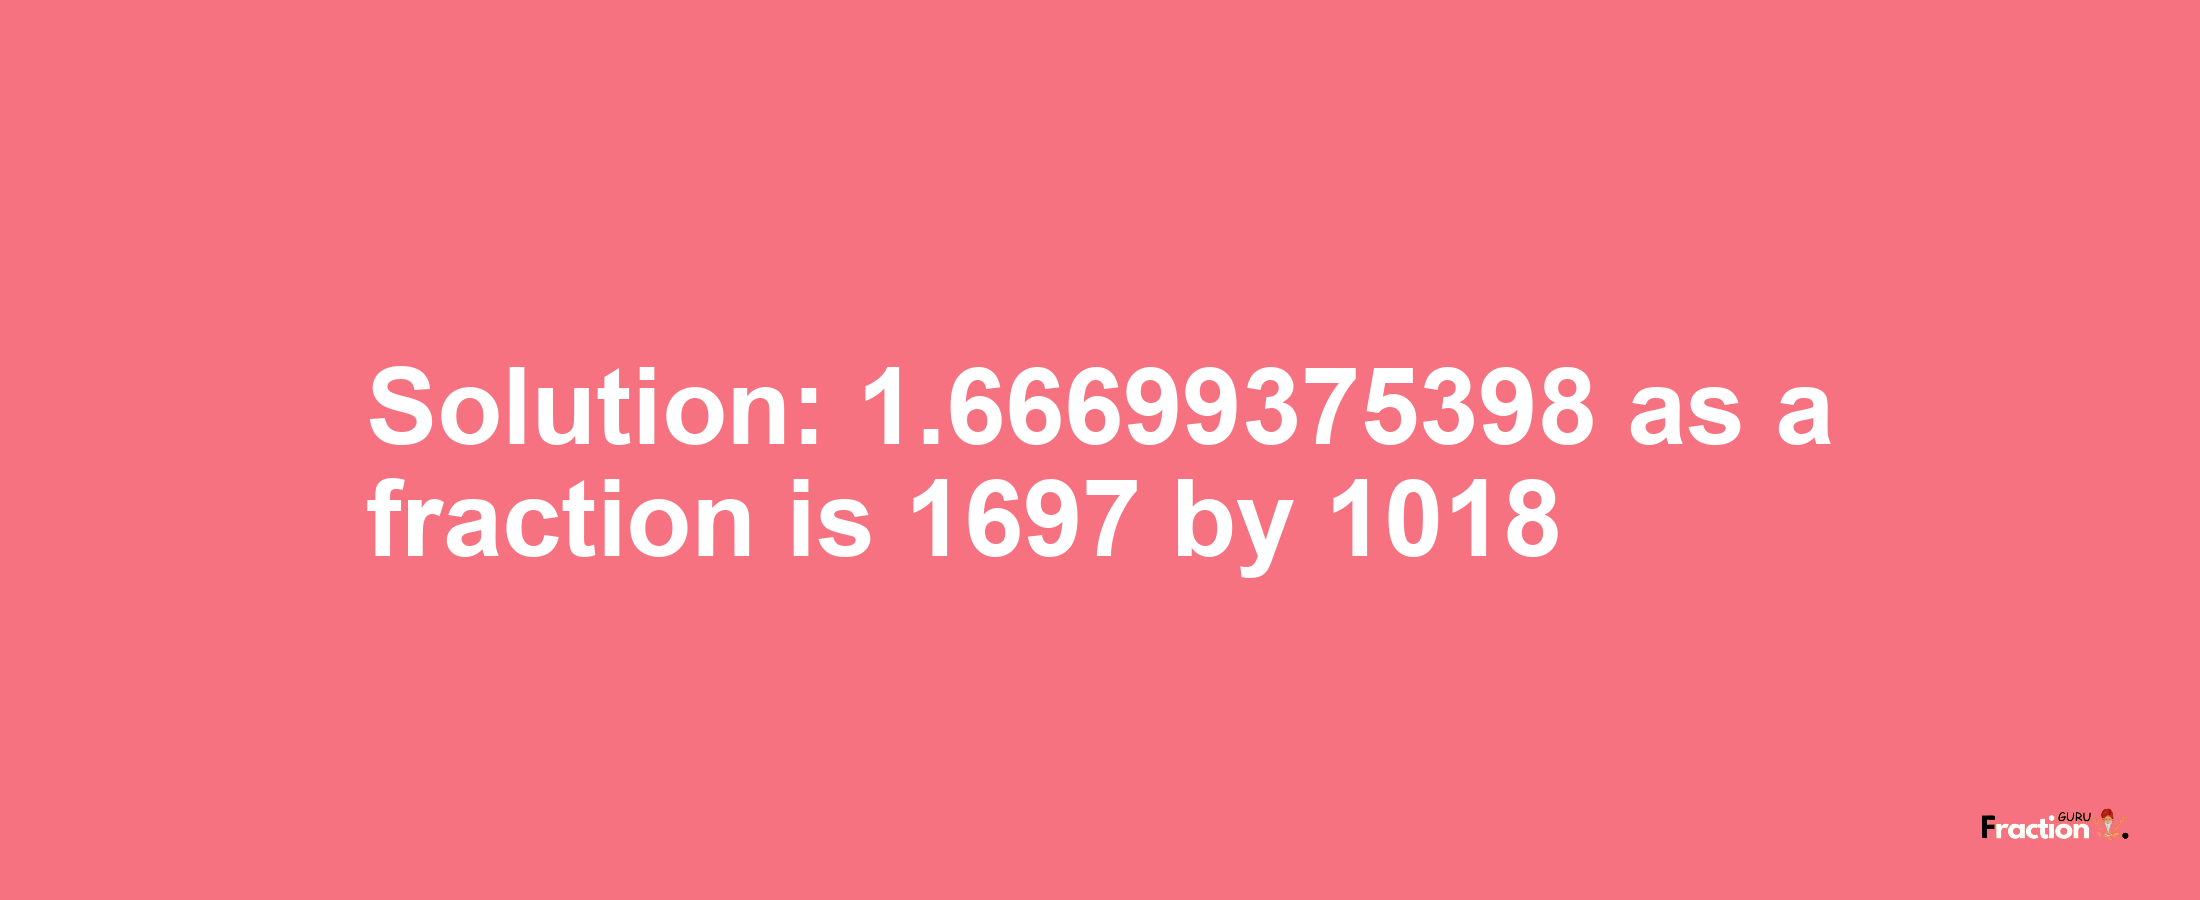 Solution:1.66699375398 as a fraction is 1697/1018